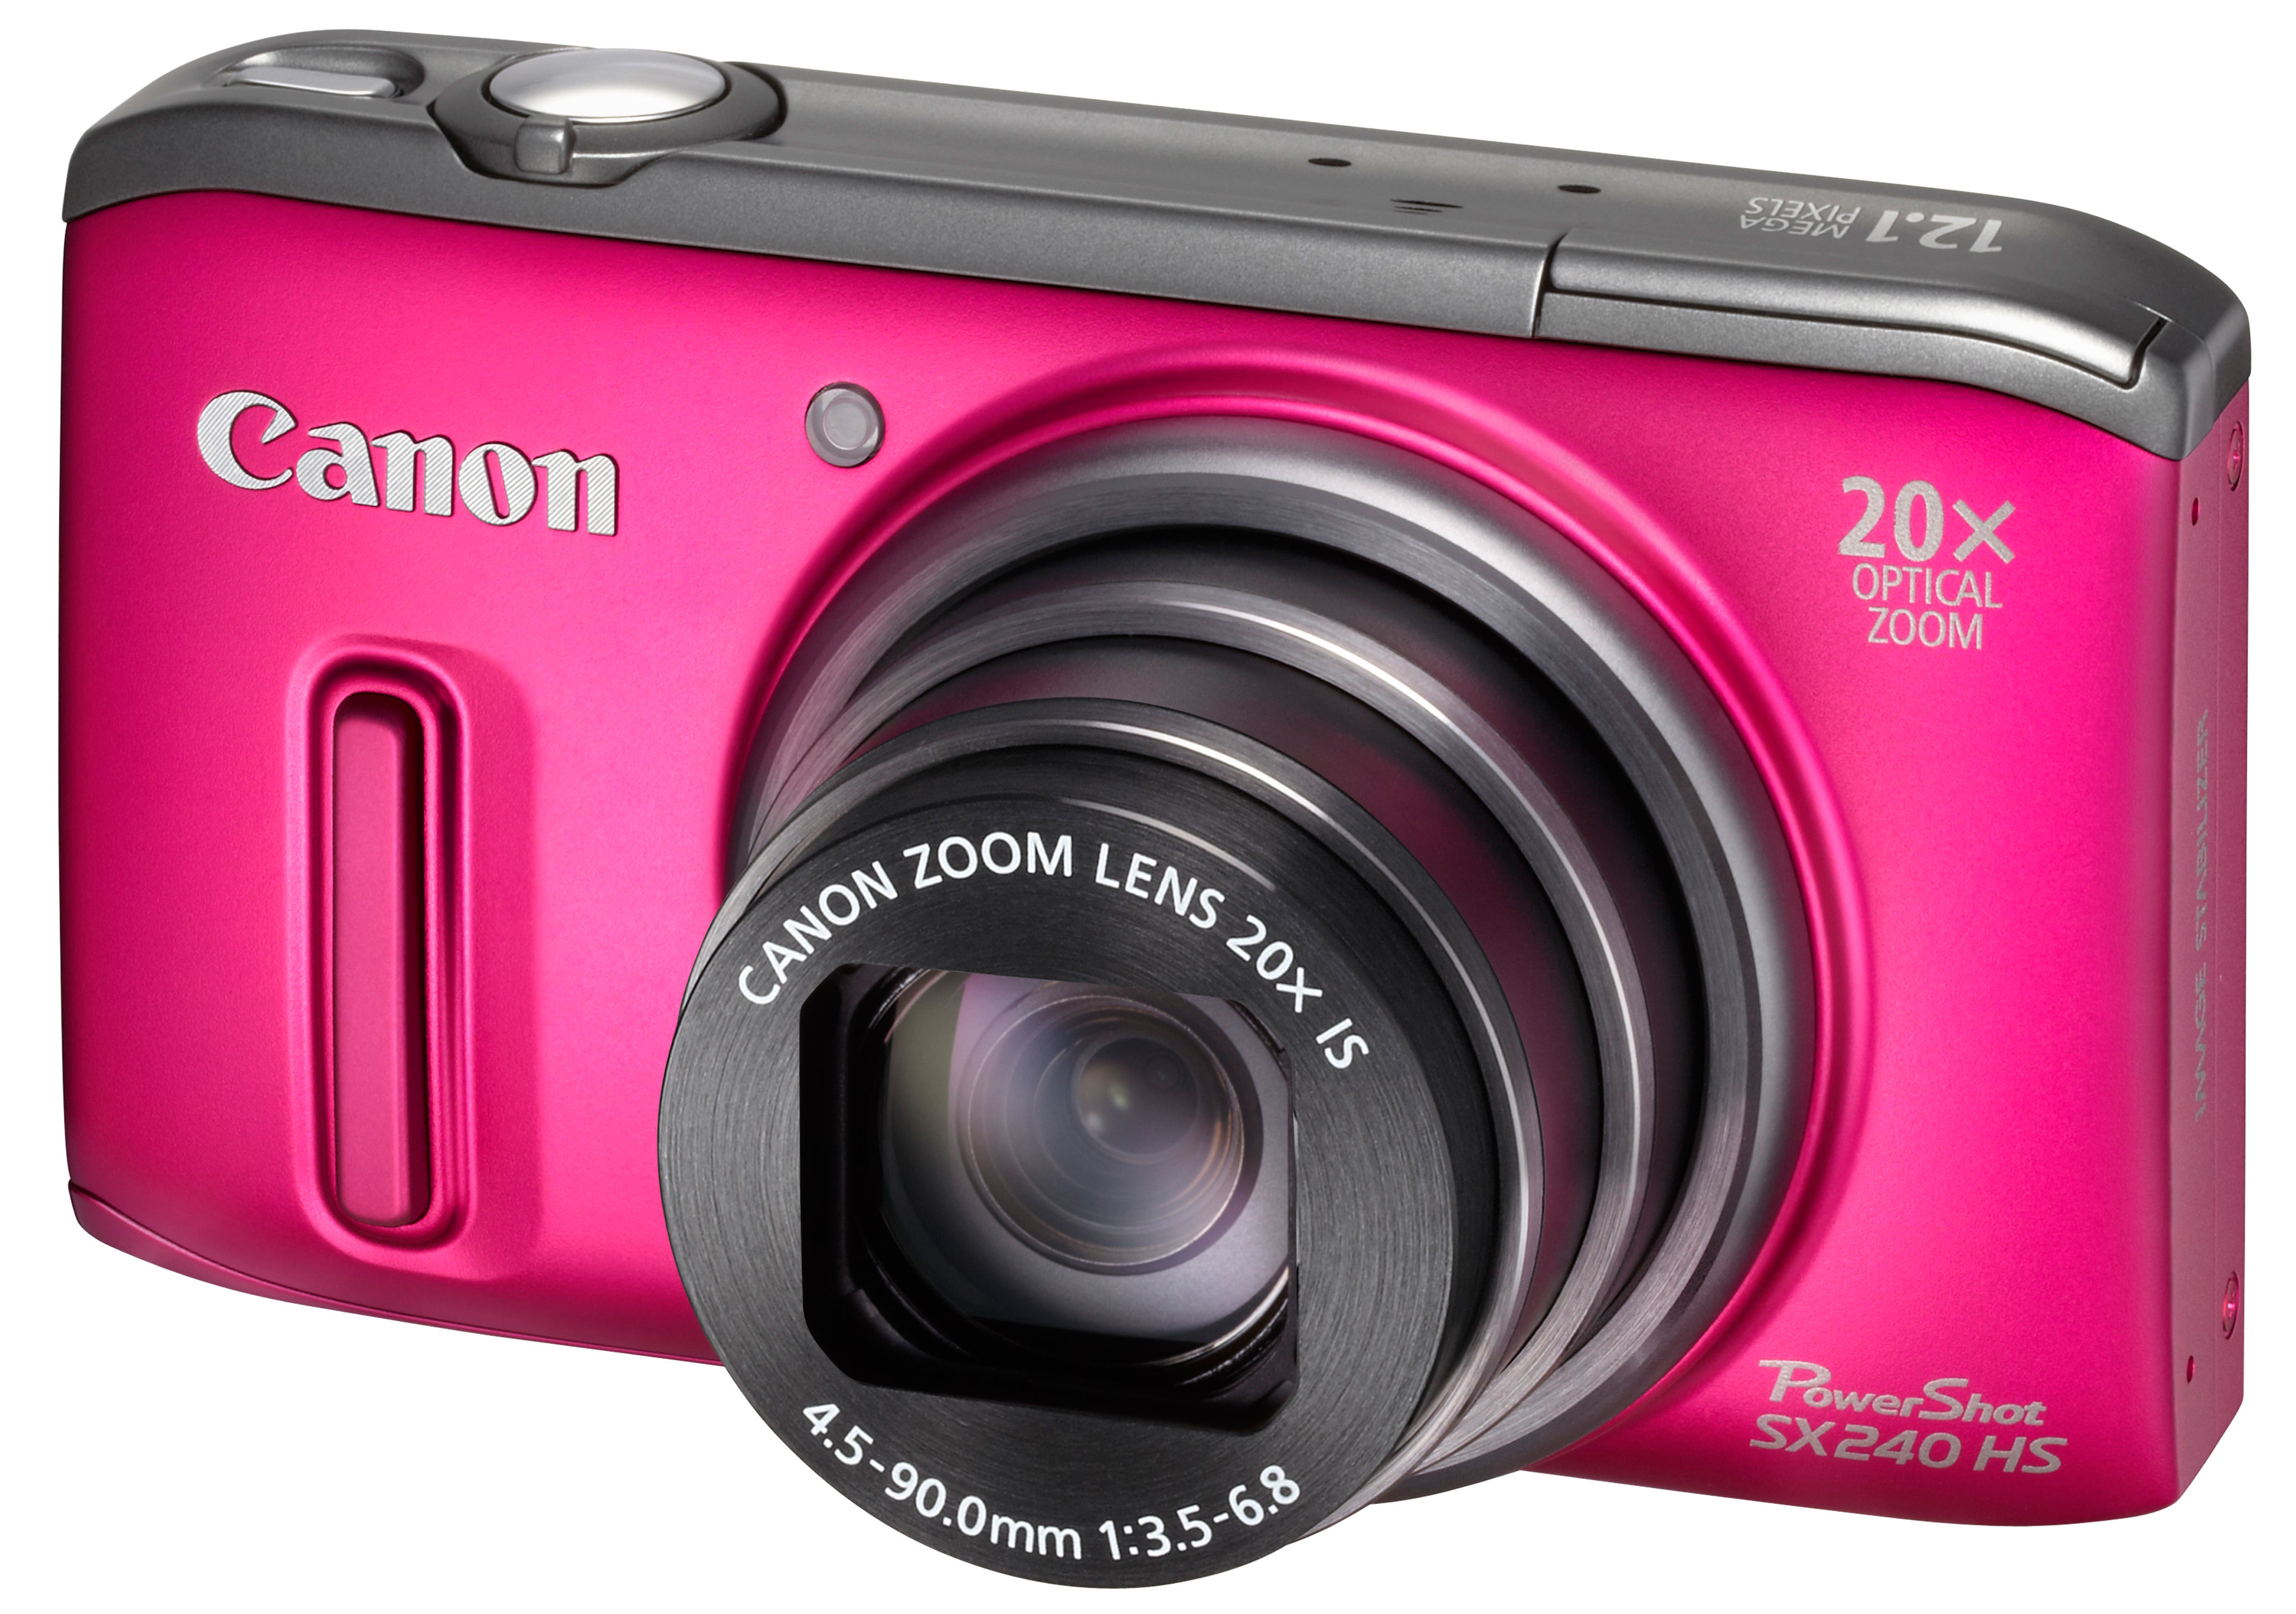 One of the most efficient Digital Cameras of 2010